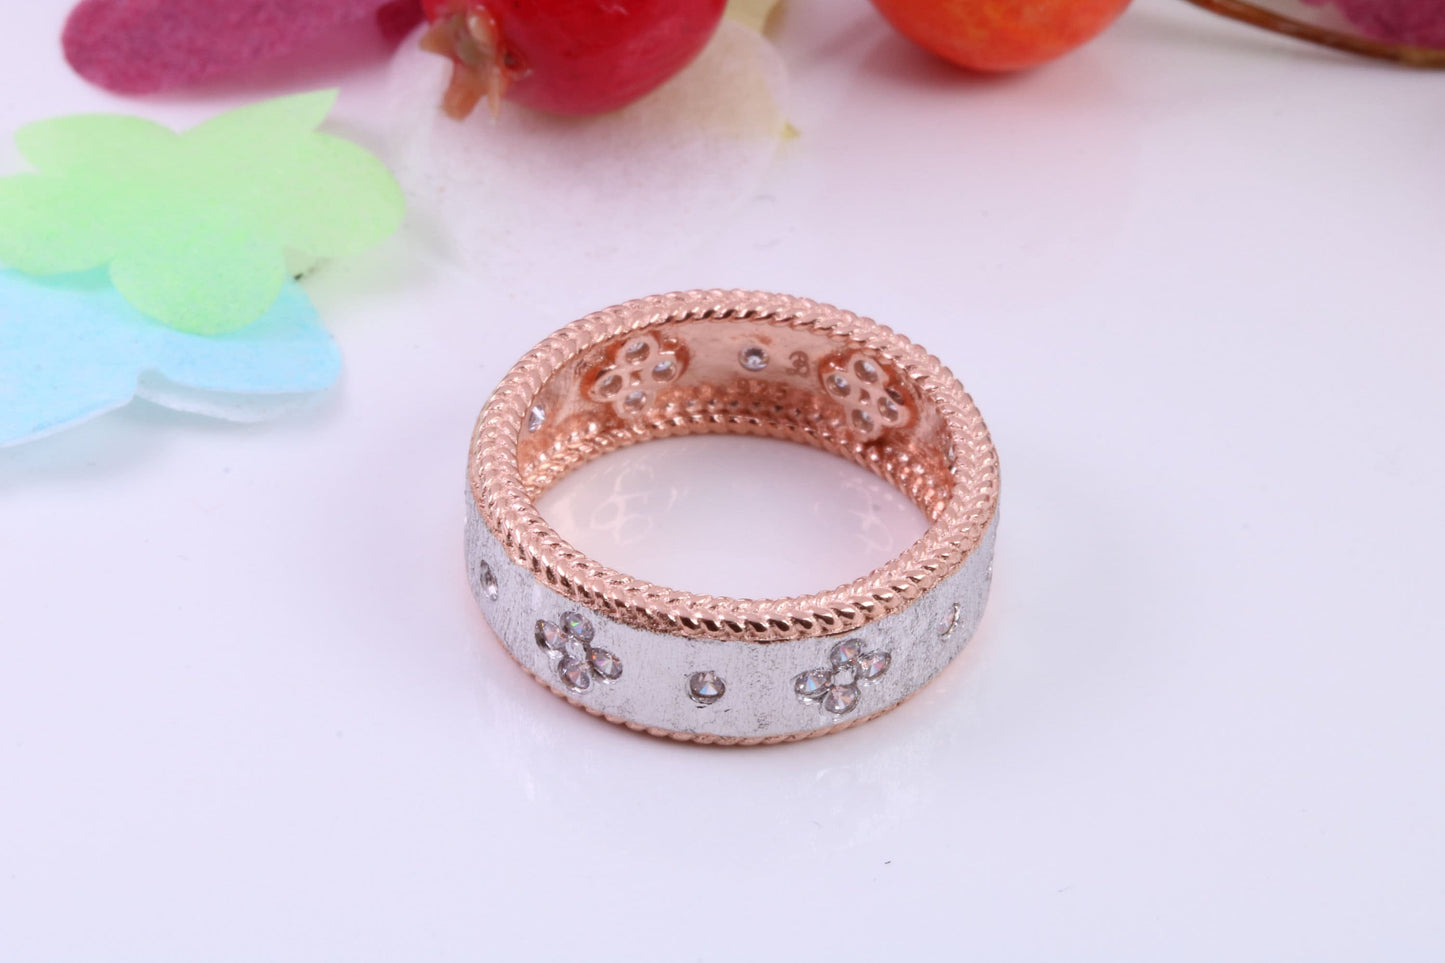 7 mm Wide Very Dressy Cubic Zirconia set Ring, Made from Solid Silver, 18ct Rose Gold Plated